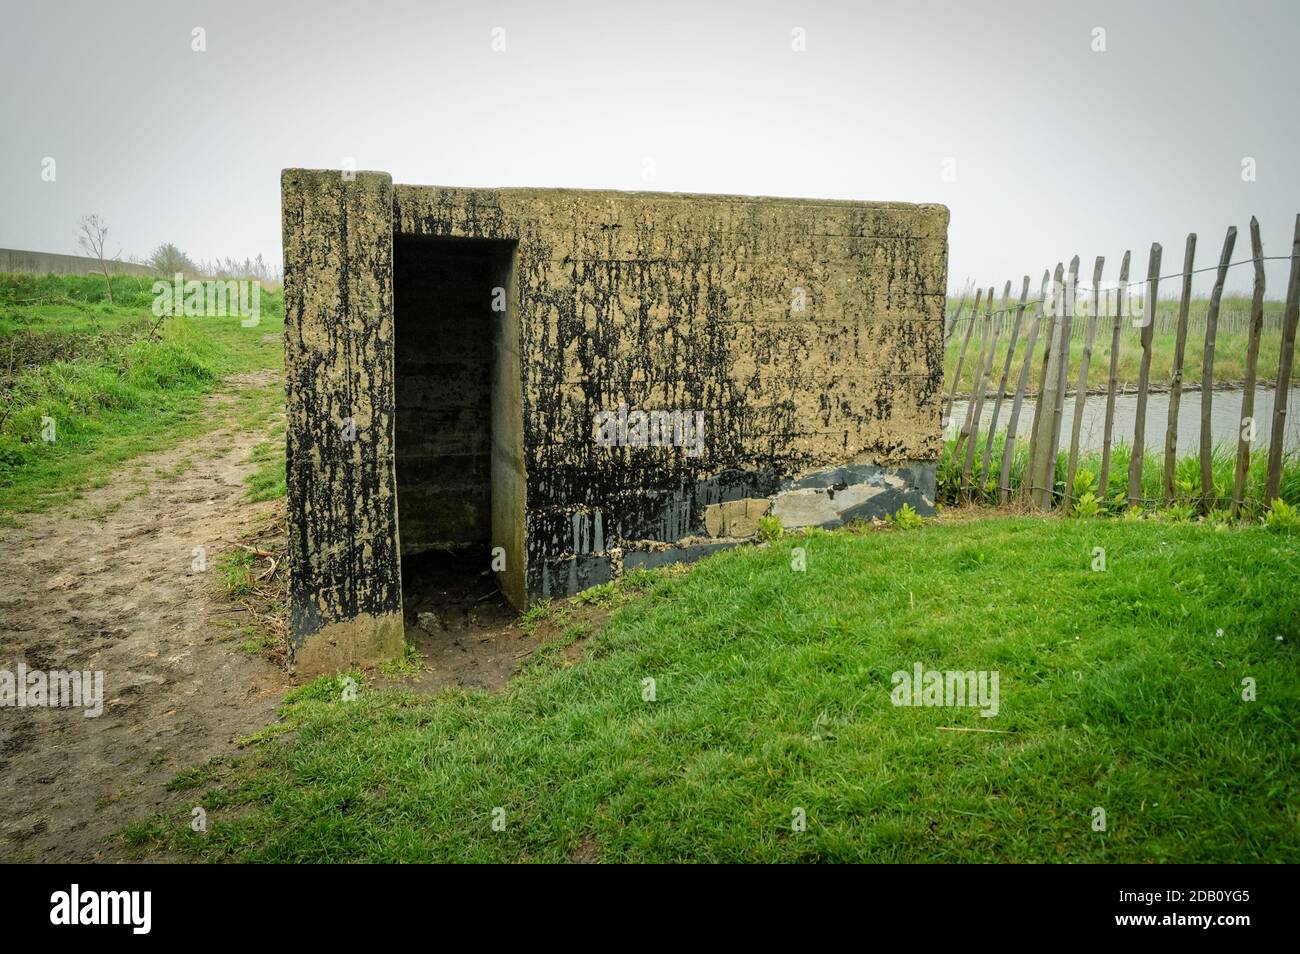 Pillbox or Bunker made around 1940 to defend the United Kingdom against possible enemy invasion, Coalhouse Fort, East Tilbury, Essex, England Stock Photo